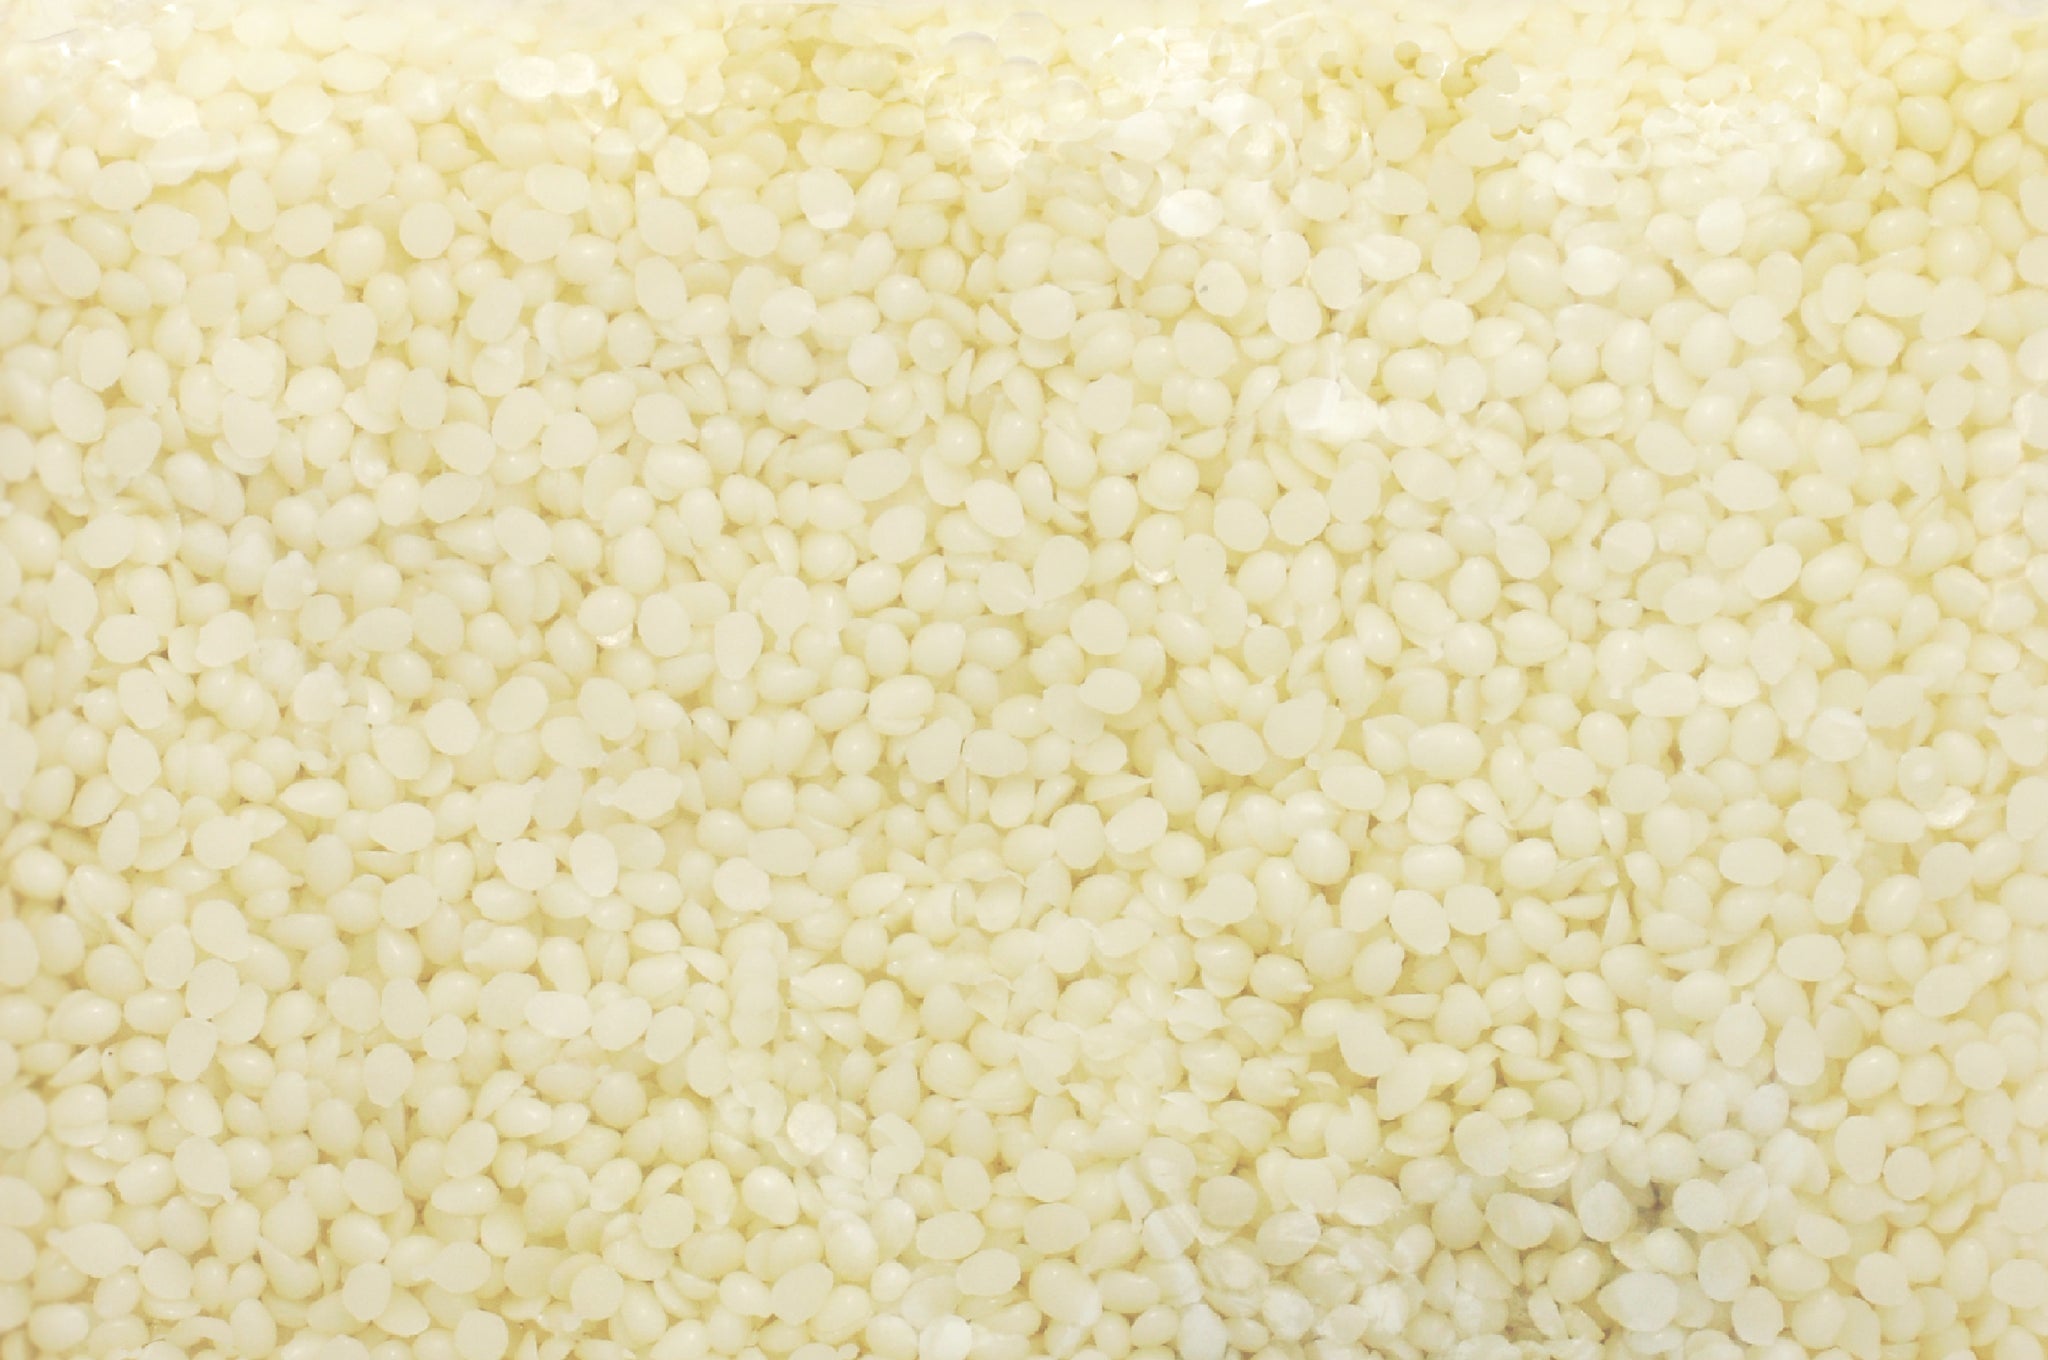 Natural Organic BEESWAX Pellets Pure White Pearls NO Additives Bulk Sizes  Wholesale Pricing Candle Making, Crafts, Salves & More 